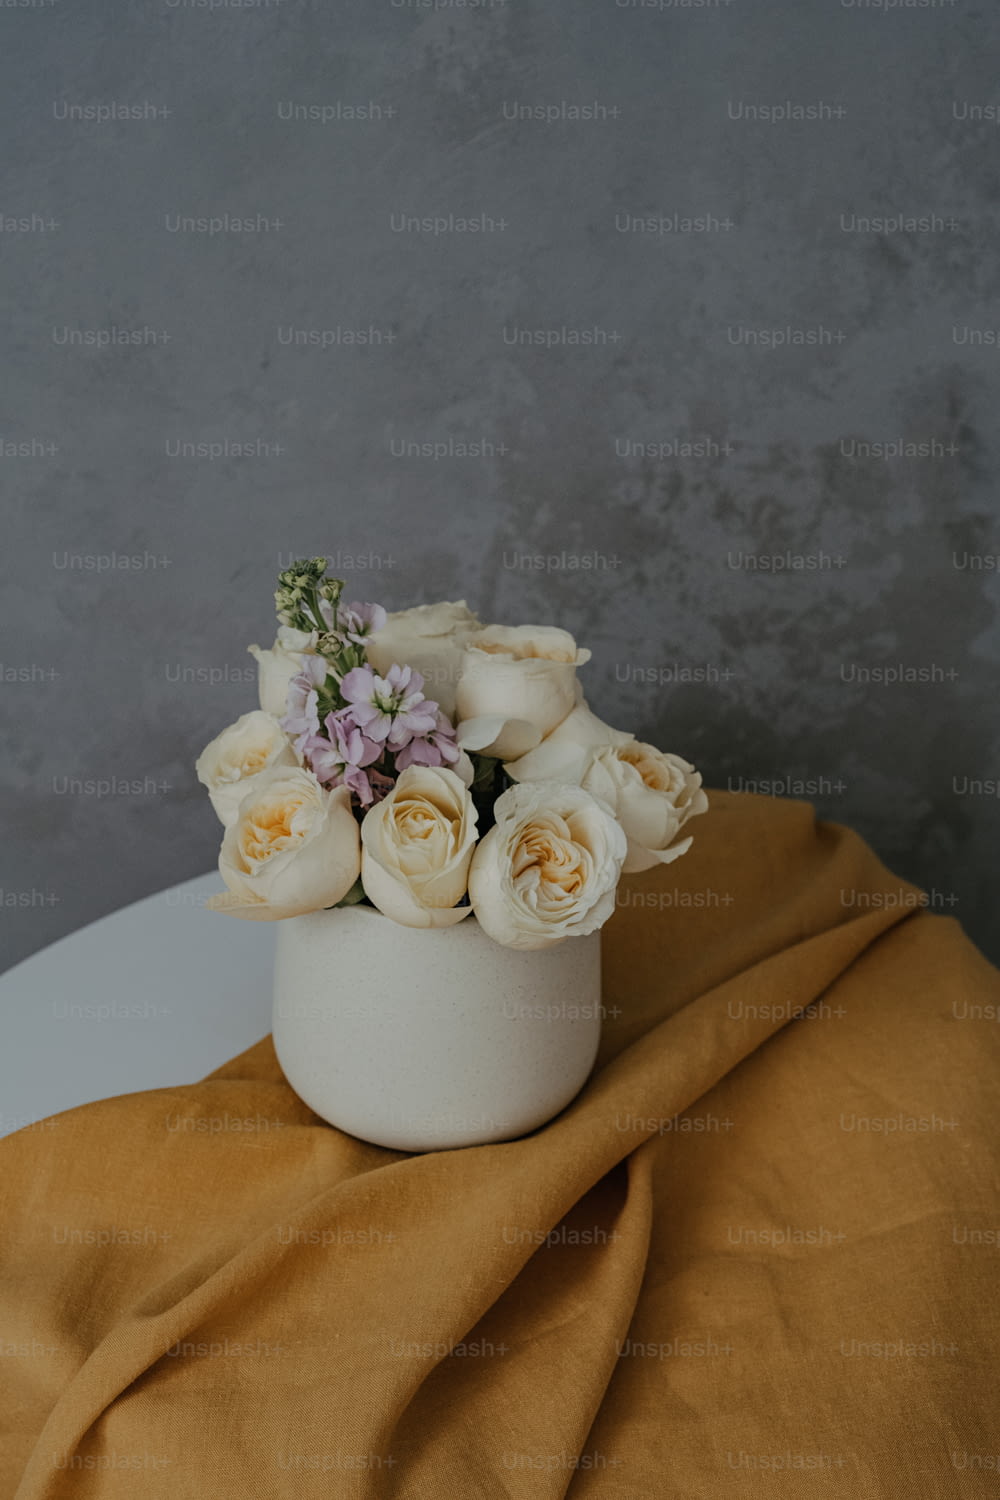 a white vase filled with white flowers on top of a table